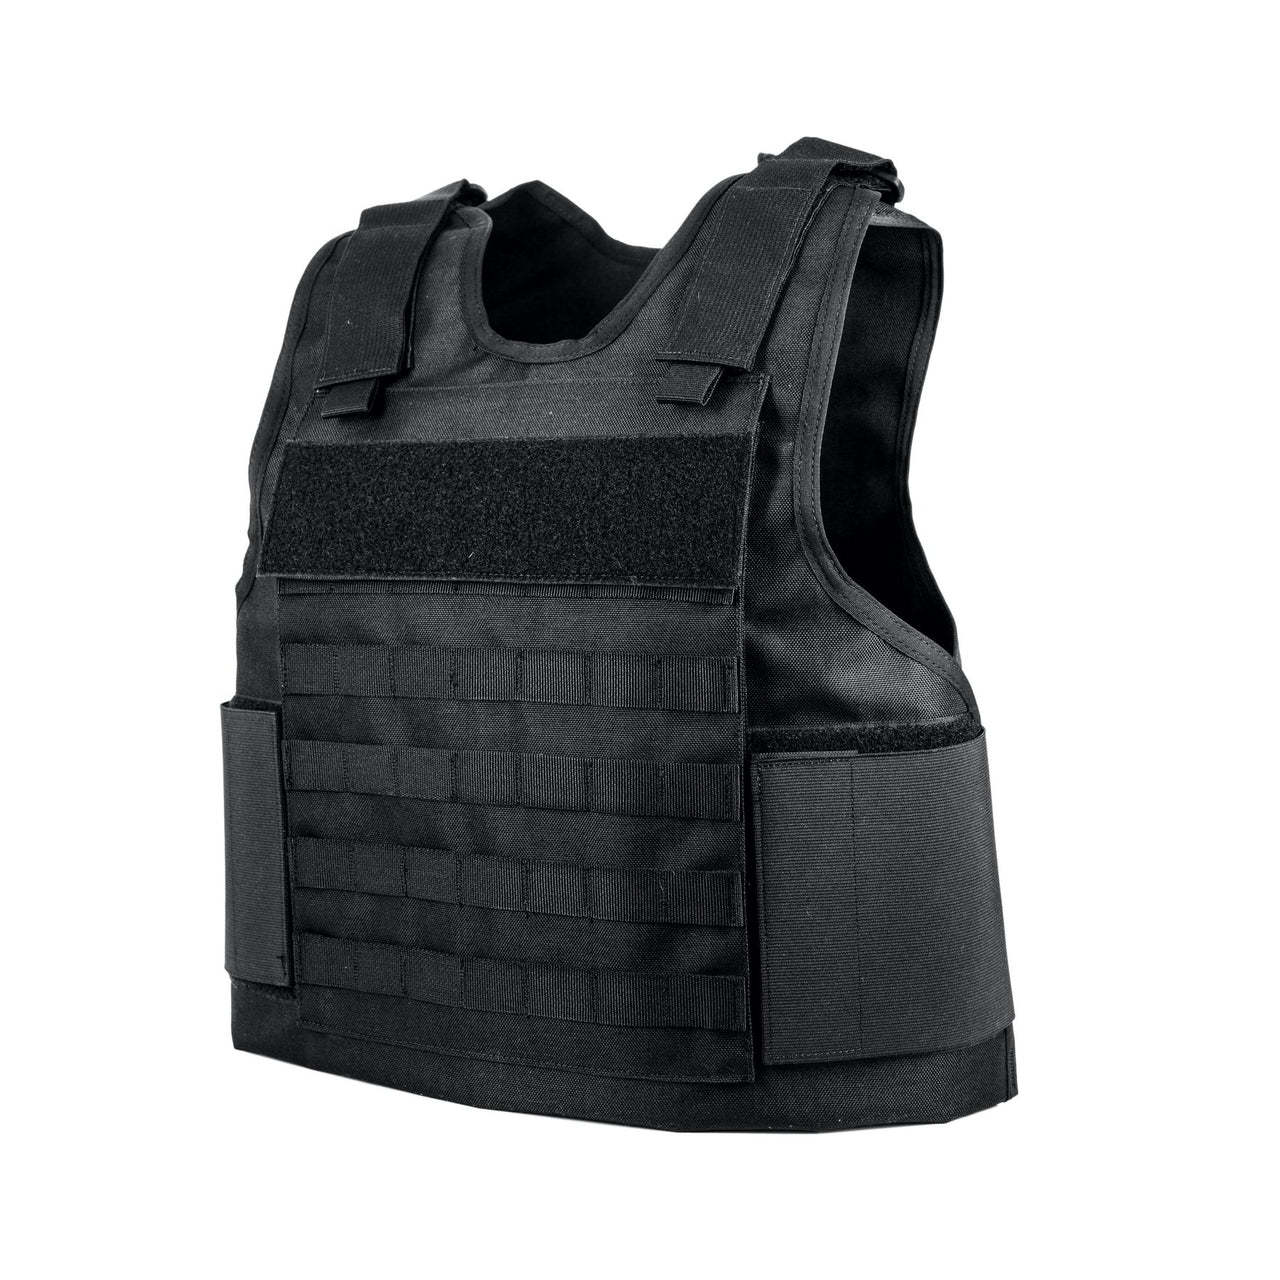 A Body Armor Direct All Star Tactical Outer Carrier plate carrier on a white background.